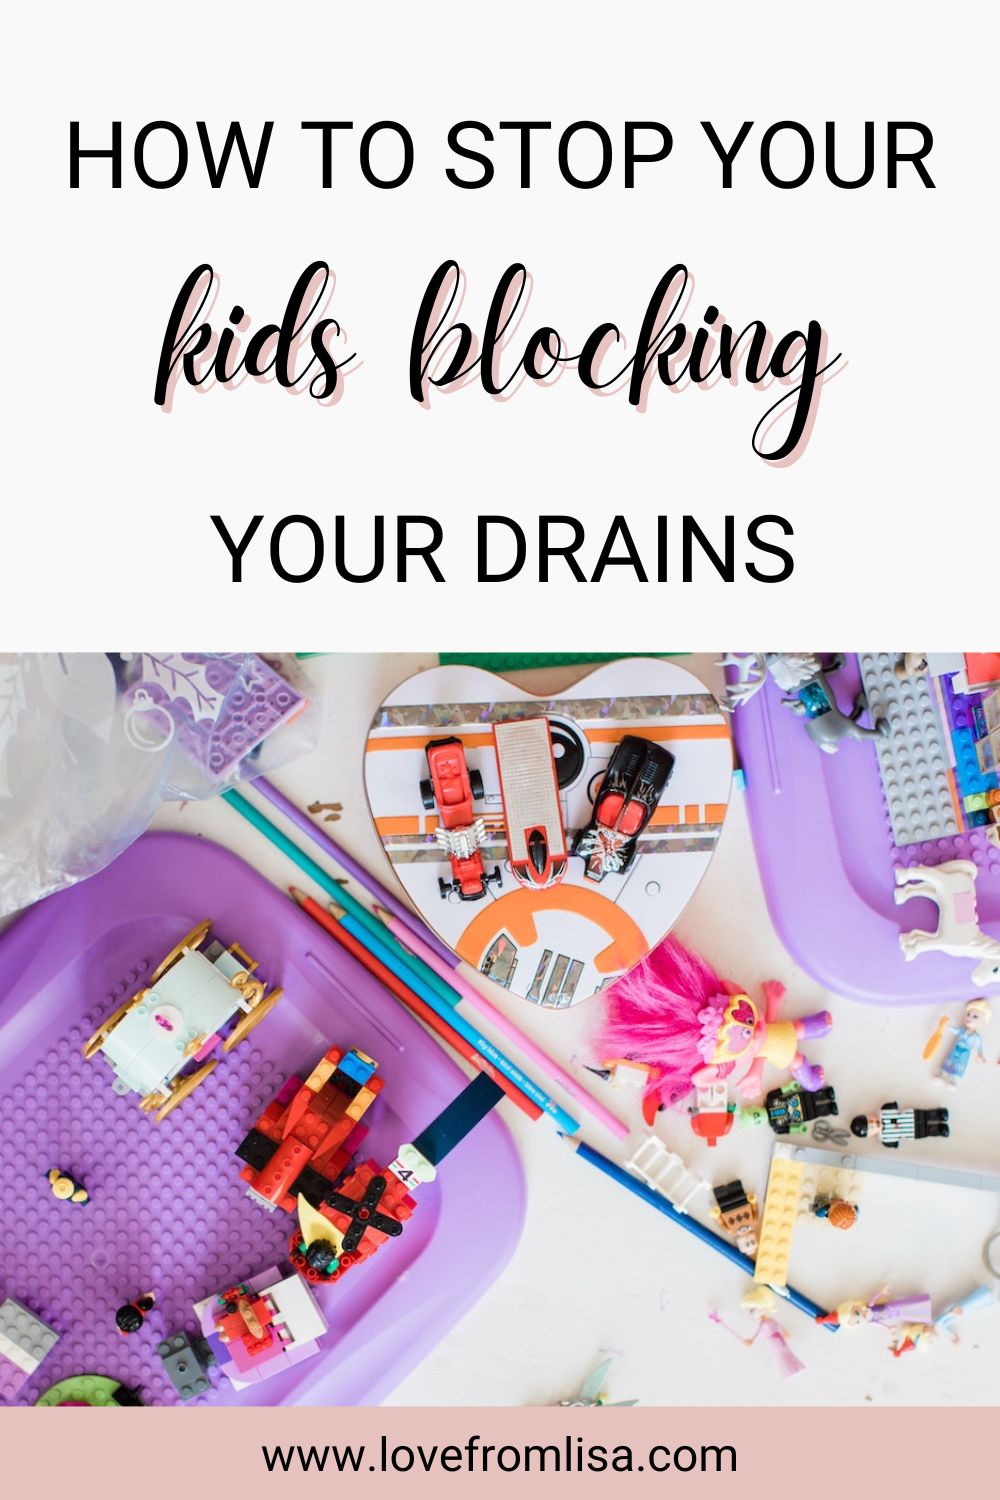 How to stop your kids blocking your drains Pinterest graphic